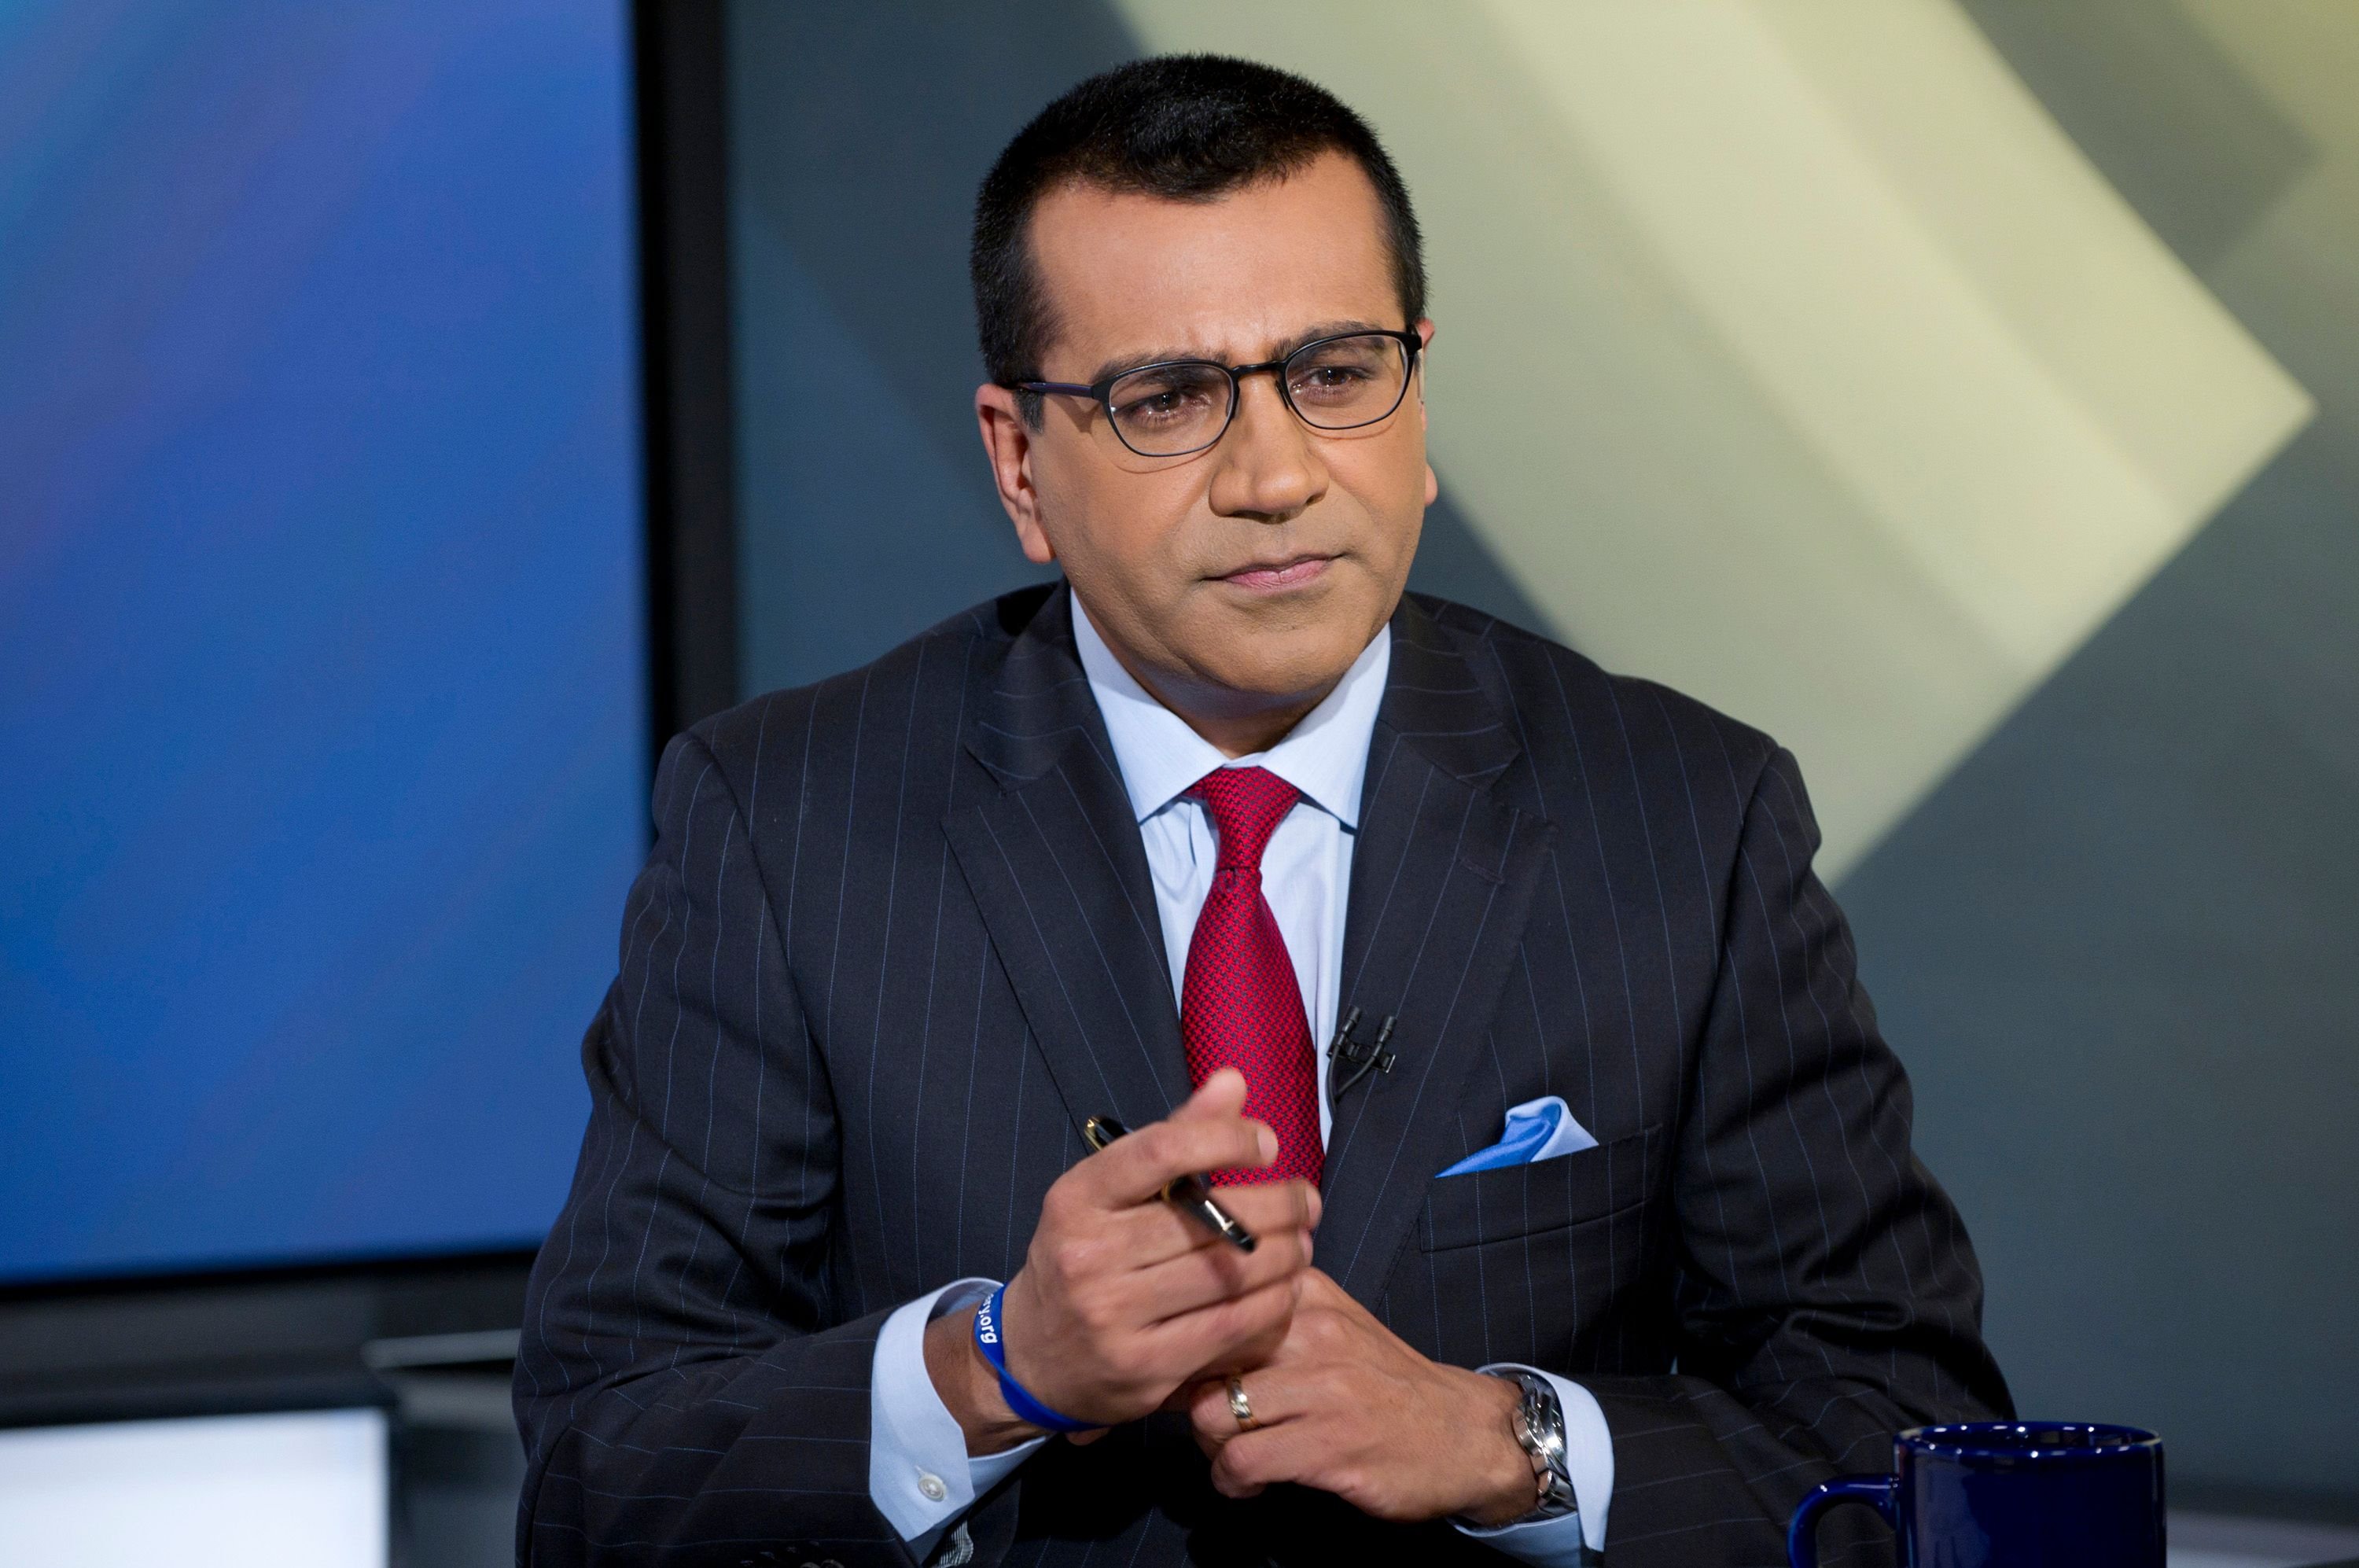 Martin Bashir joined the MSNBC daytime programming line-up with his own show on February 28, 2011 | Photo: Getty Images